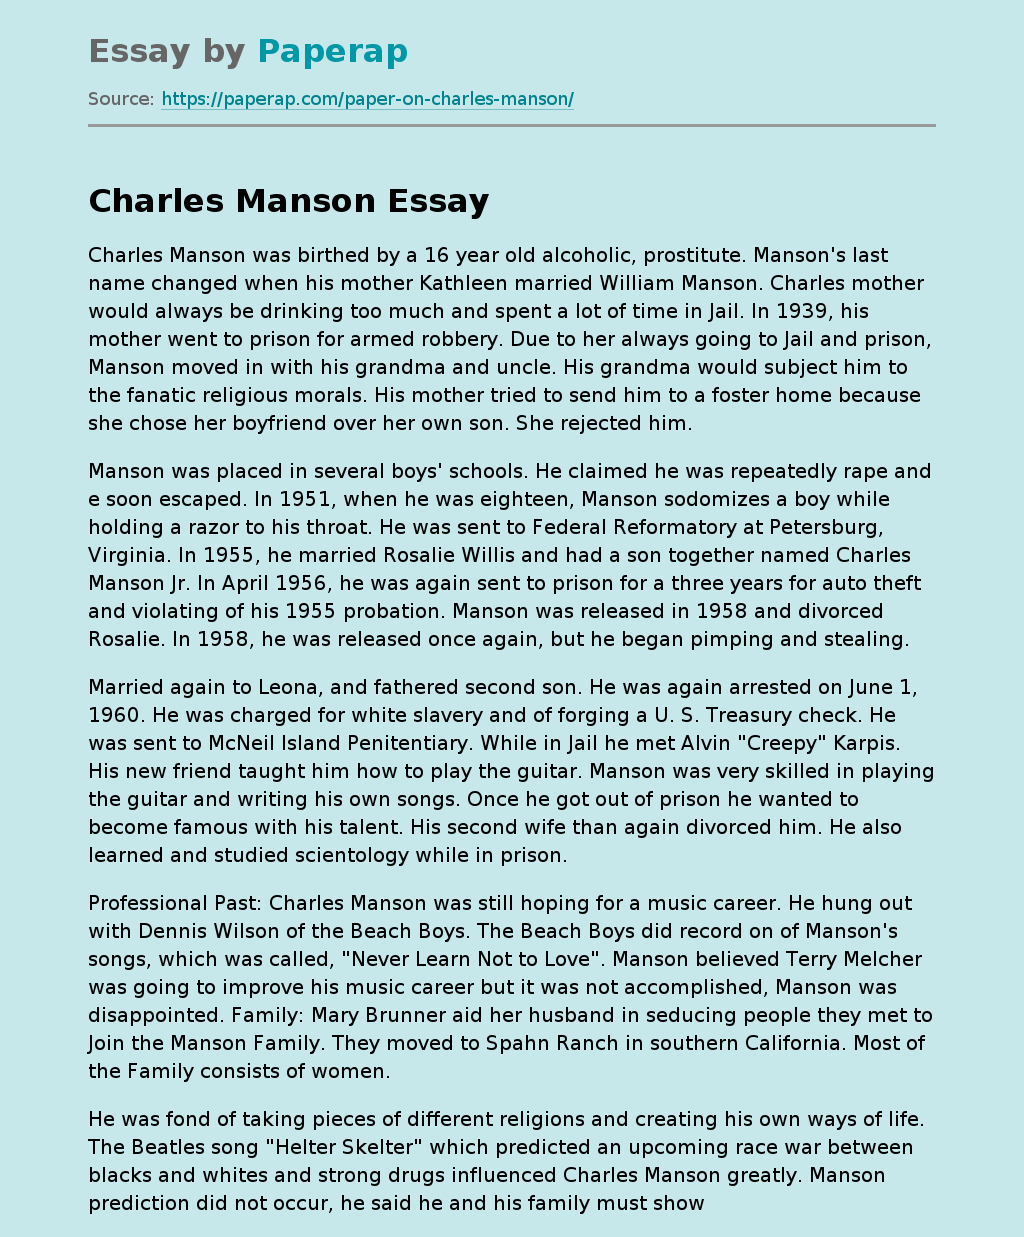 Important Moments in the Life of Charles Manson